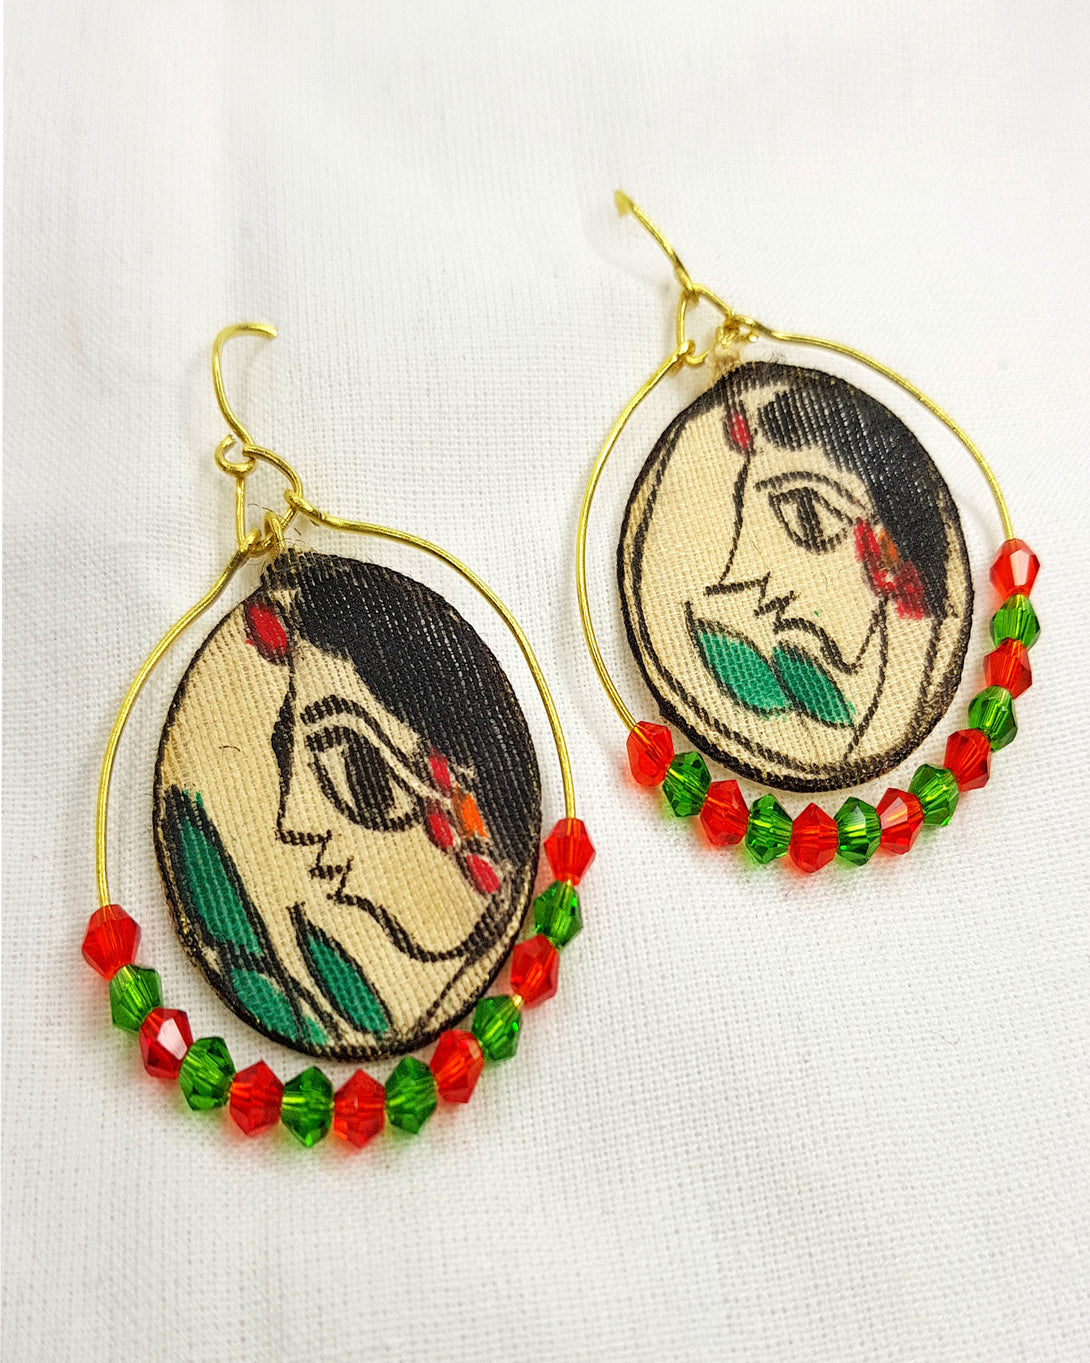 Mithila Tales Kalika Upcycled Handmade Earrings 2 from our zero waste store